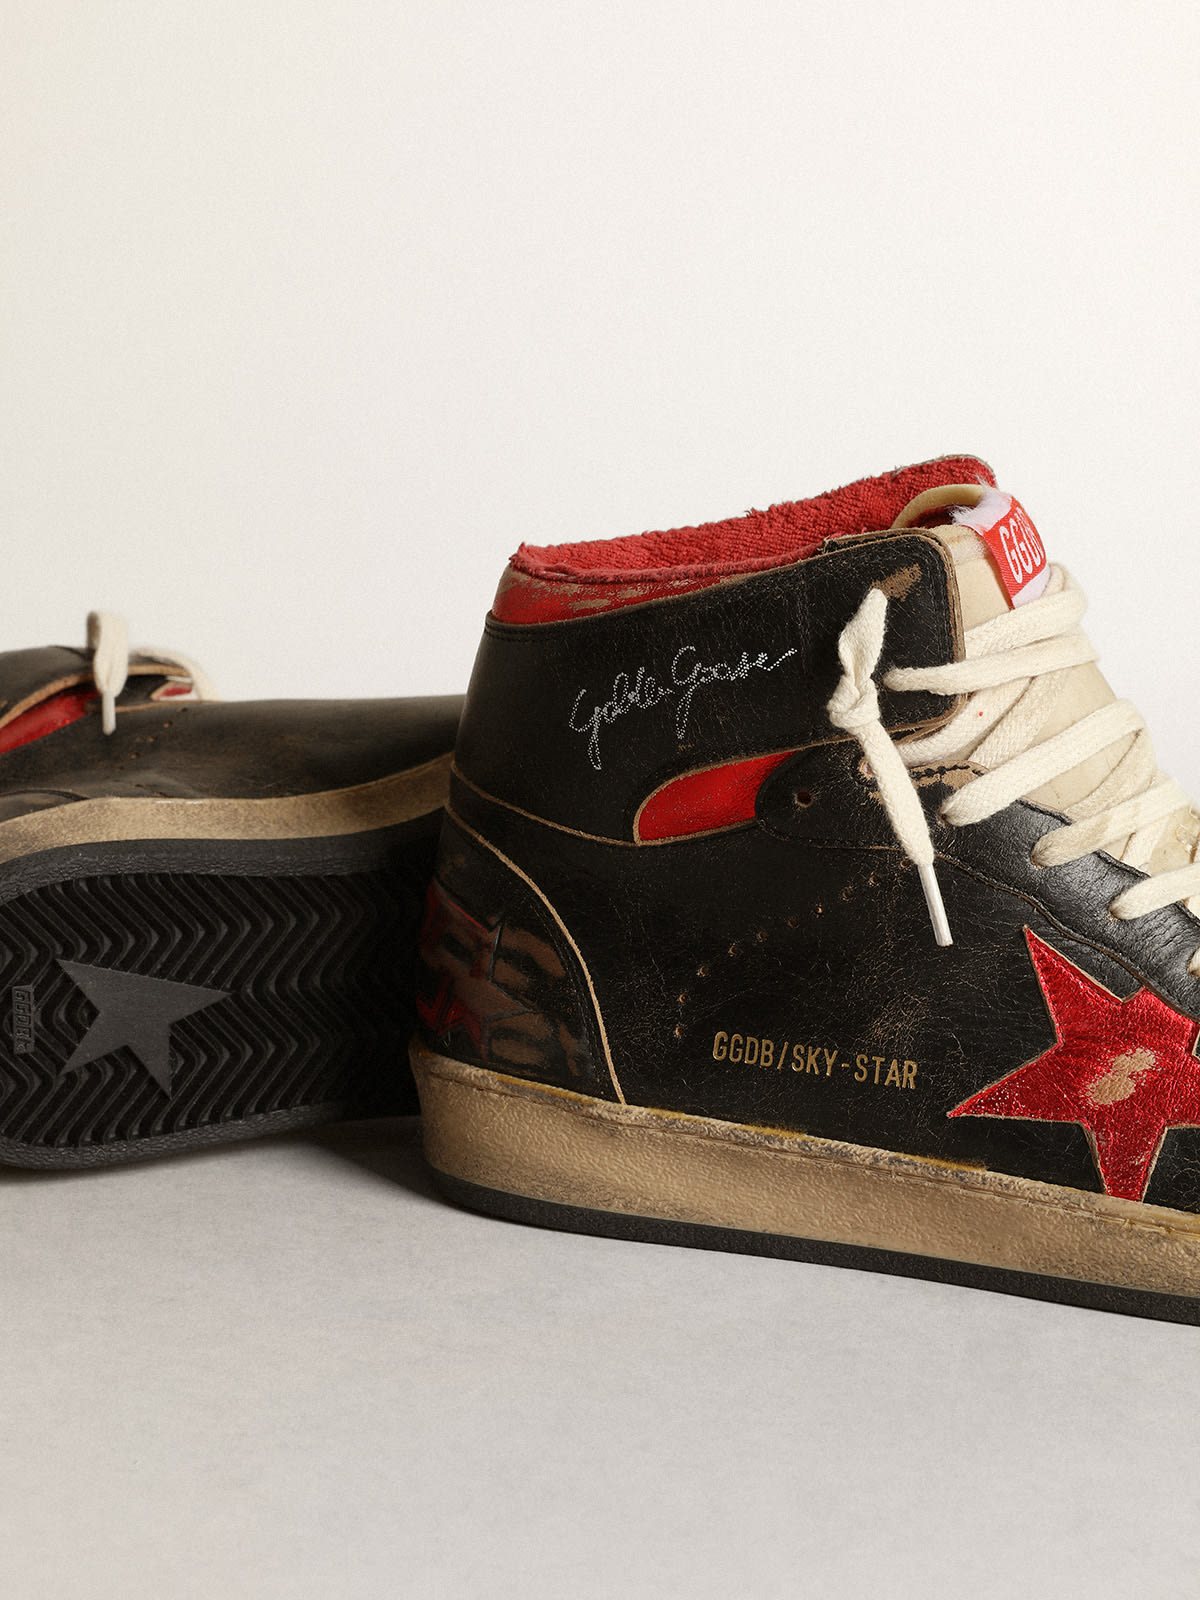 Golden Goose - Sky-Star Men’s sneakers in glossy black leather with red metallic leather star in 